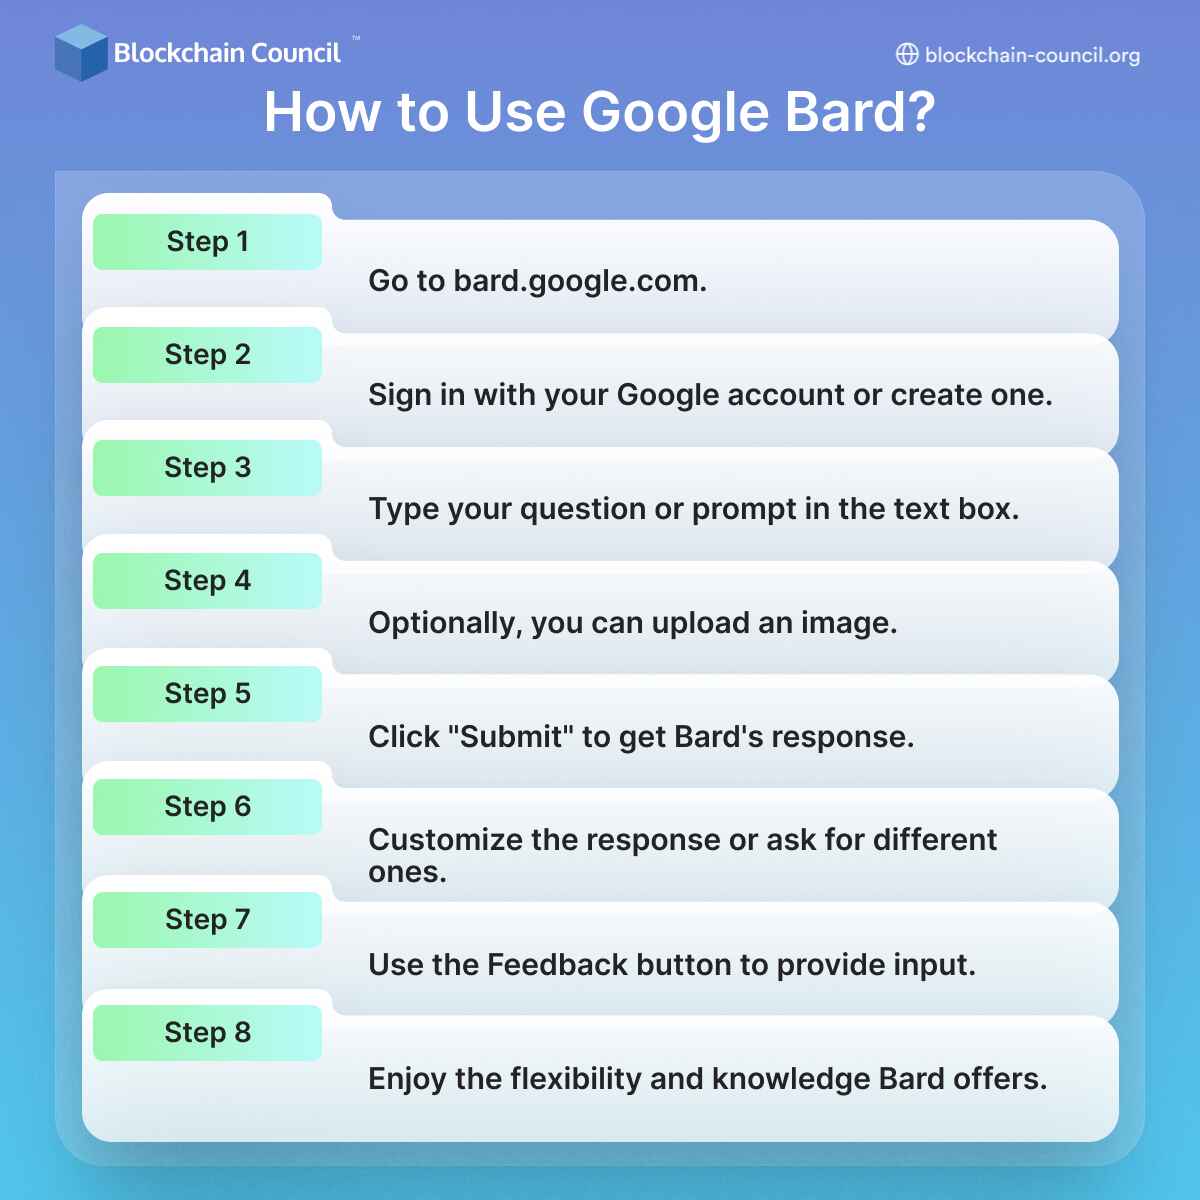 How to Use Google Bard